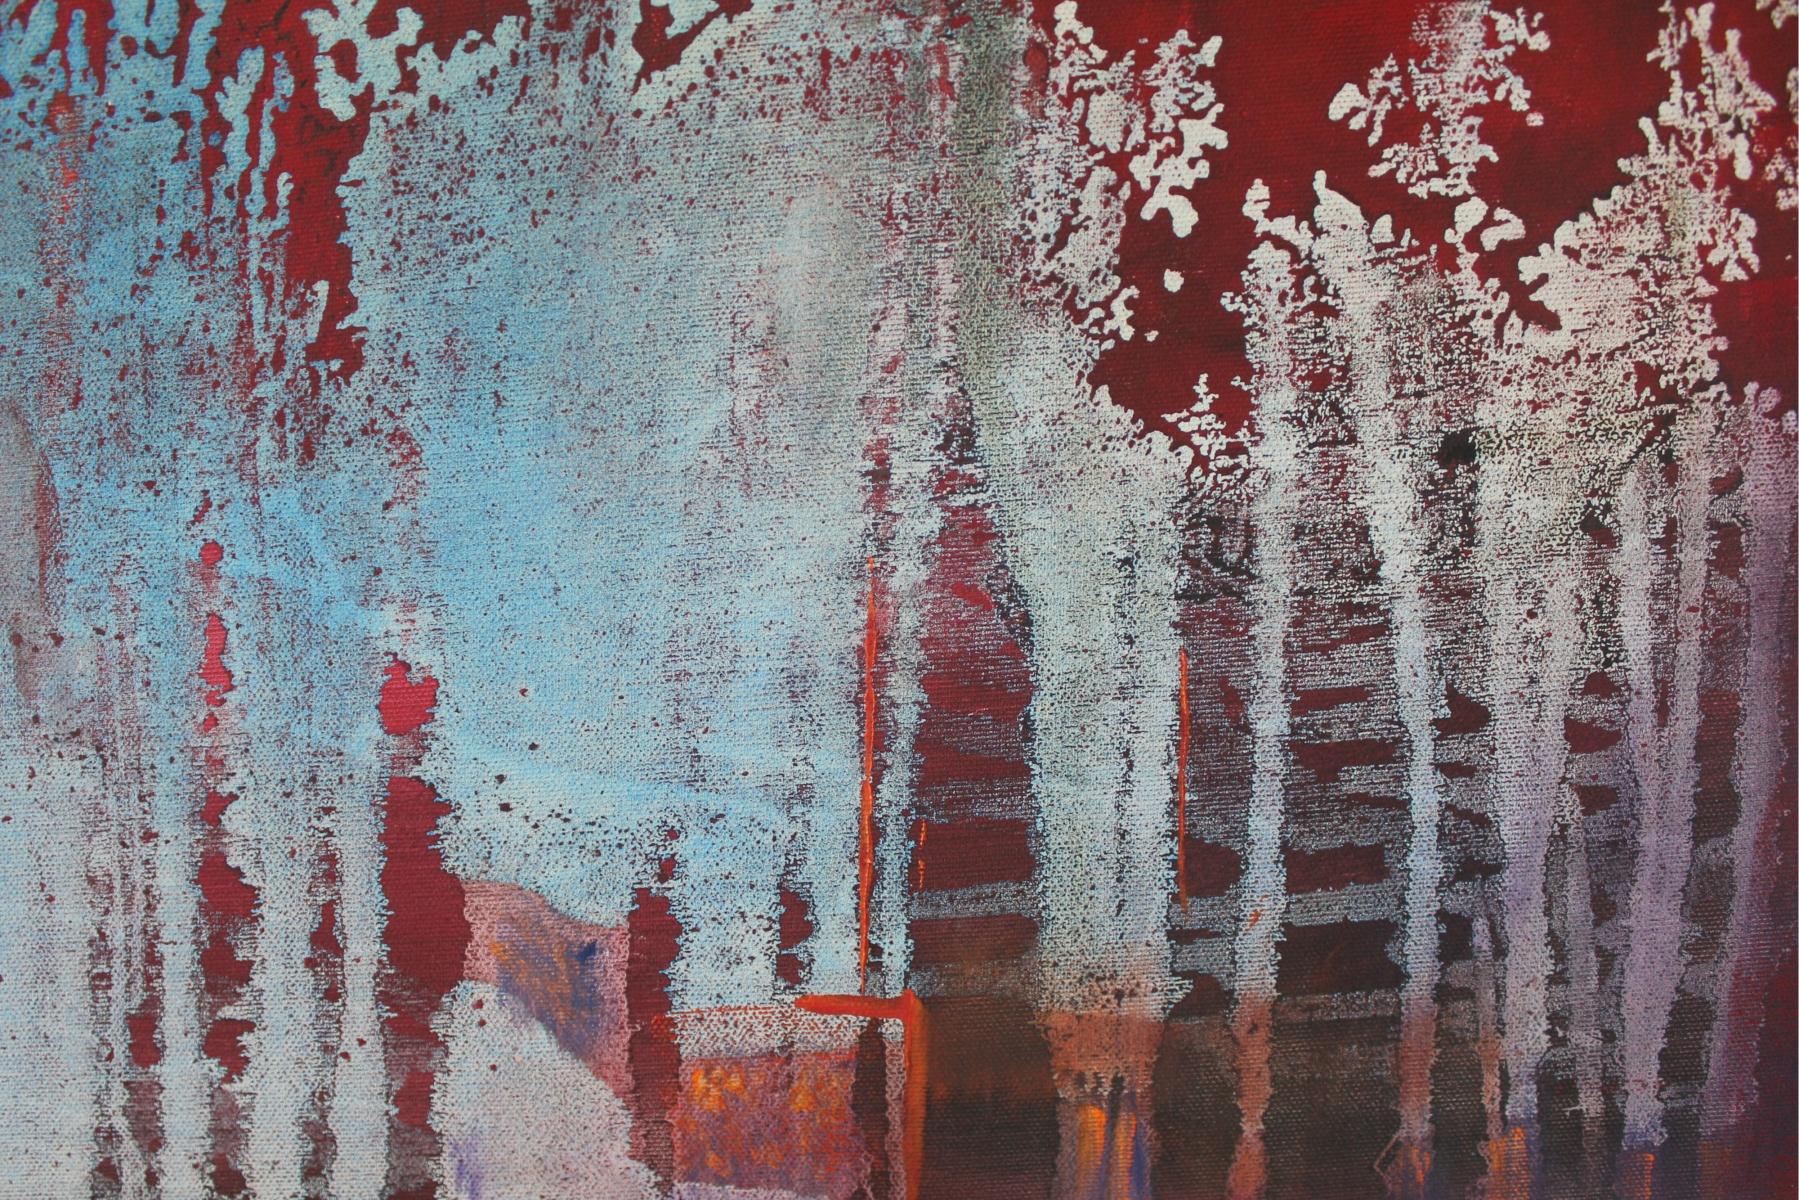 Landscape - XXI Century, Oil figurative painting, Red - Gray Figurative Painting by Barbara Hubert